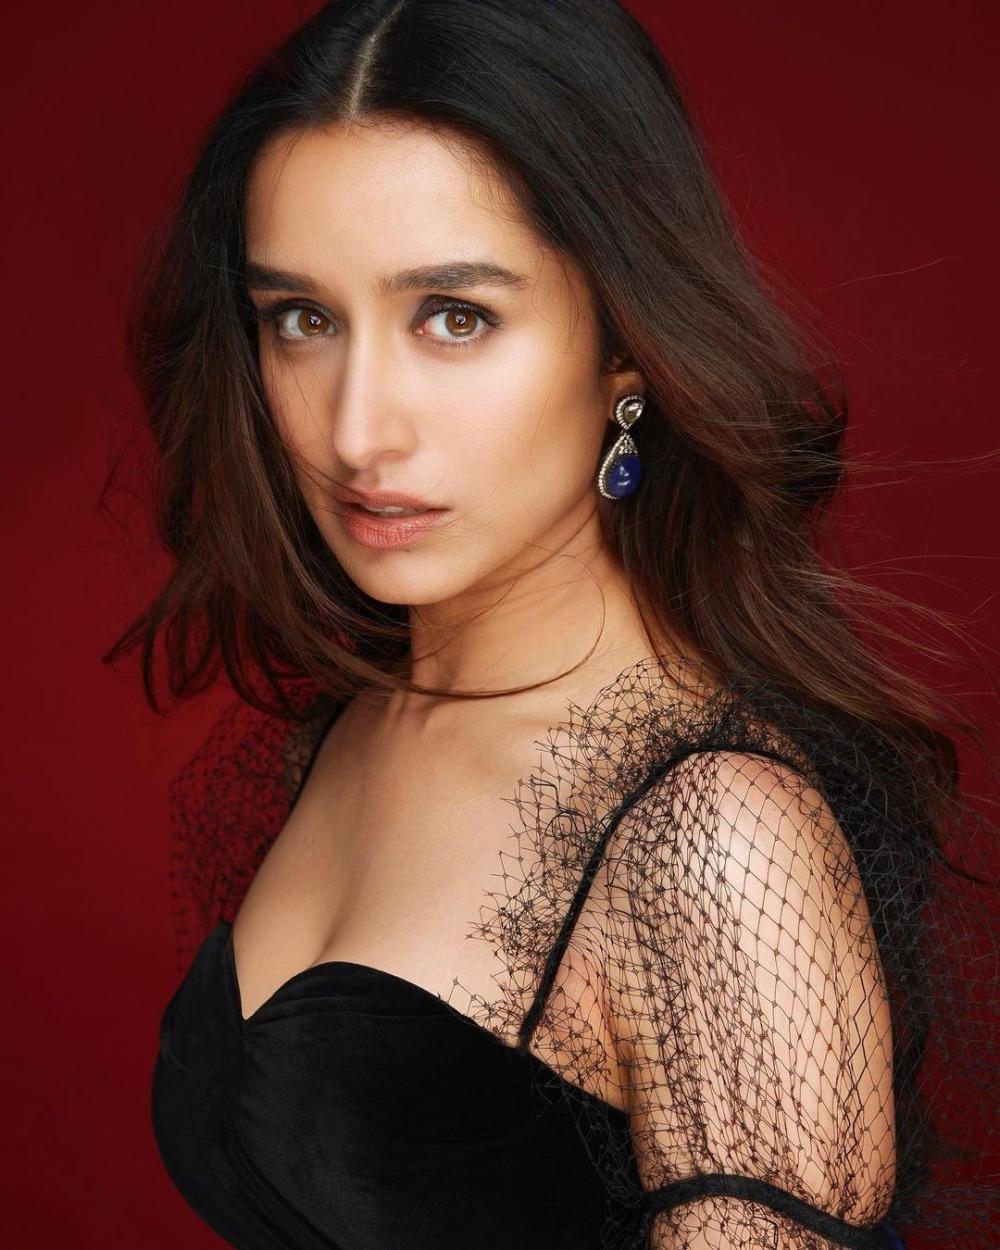 The Weekend Leader - Shraddha Kapoor: Ever since I was little, I have enjoyed seeing my father on screen